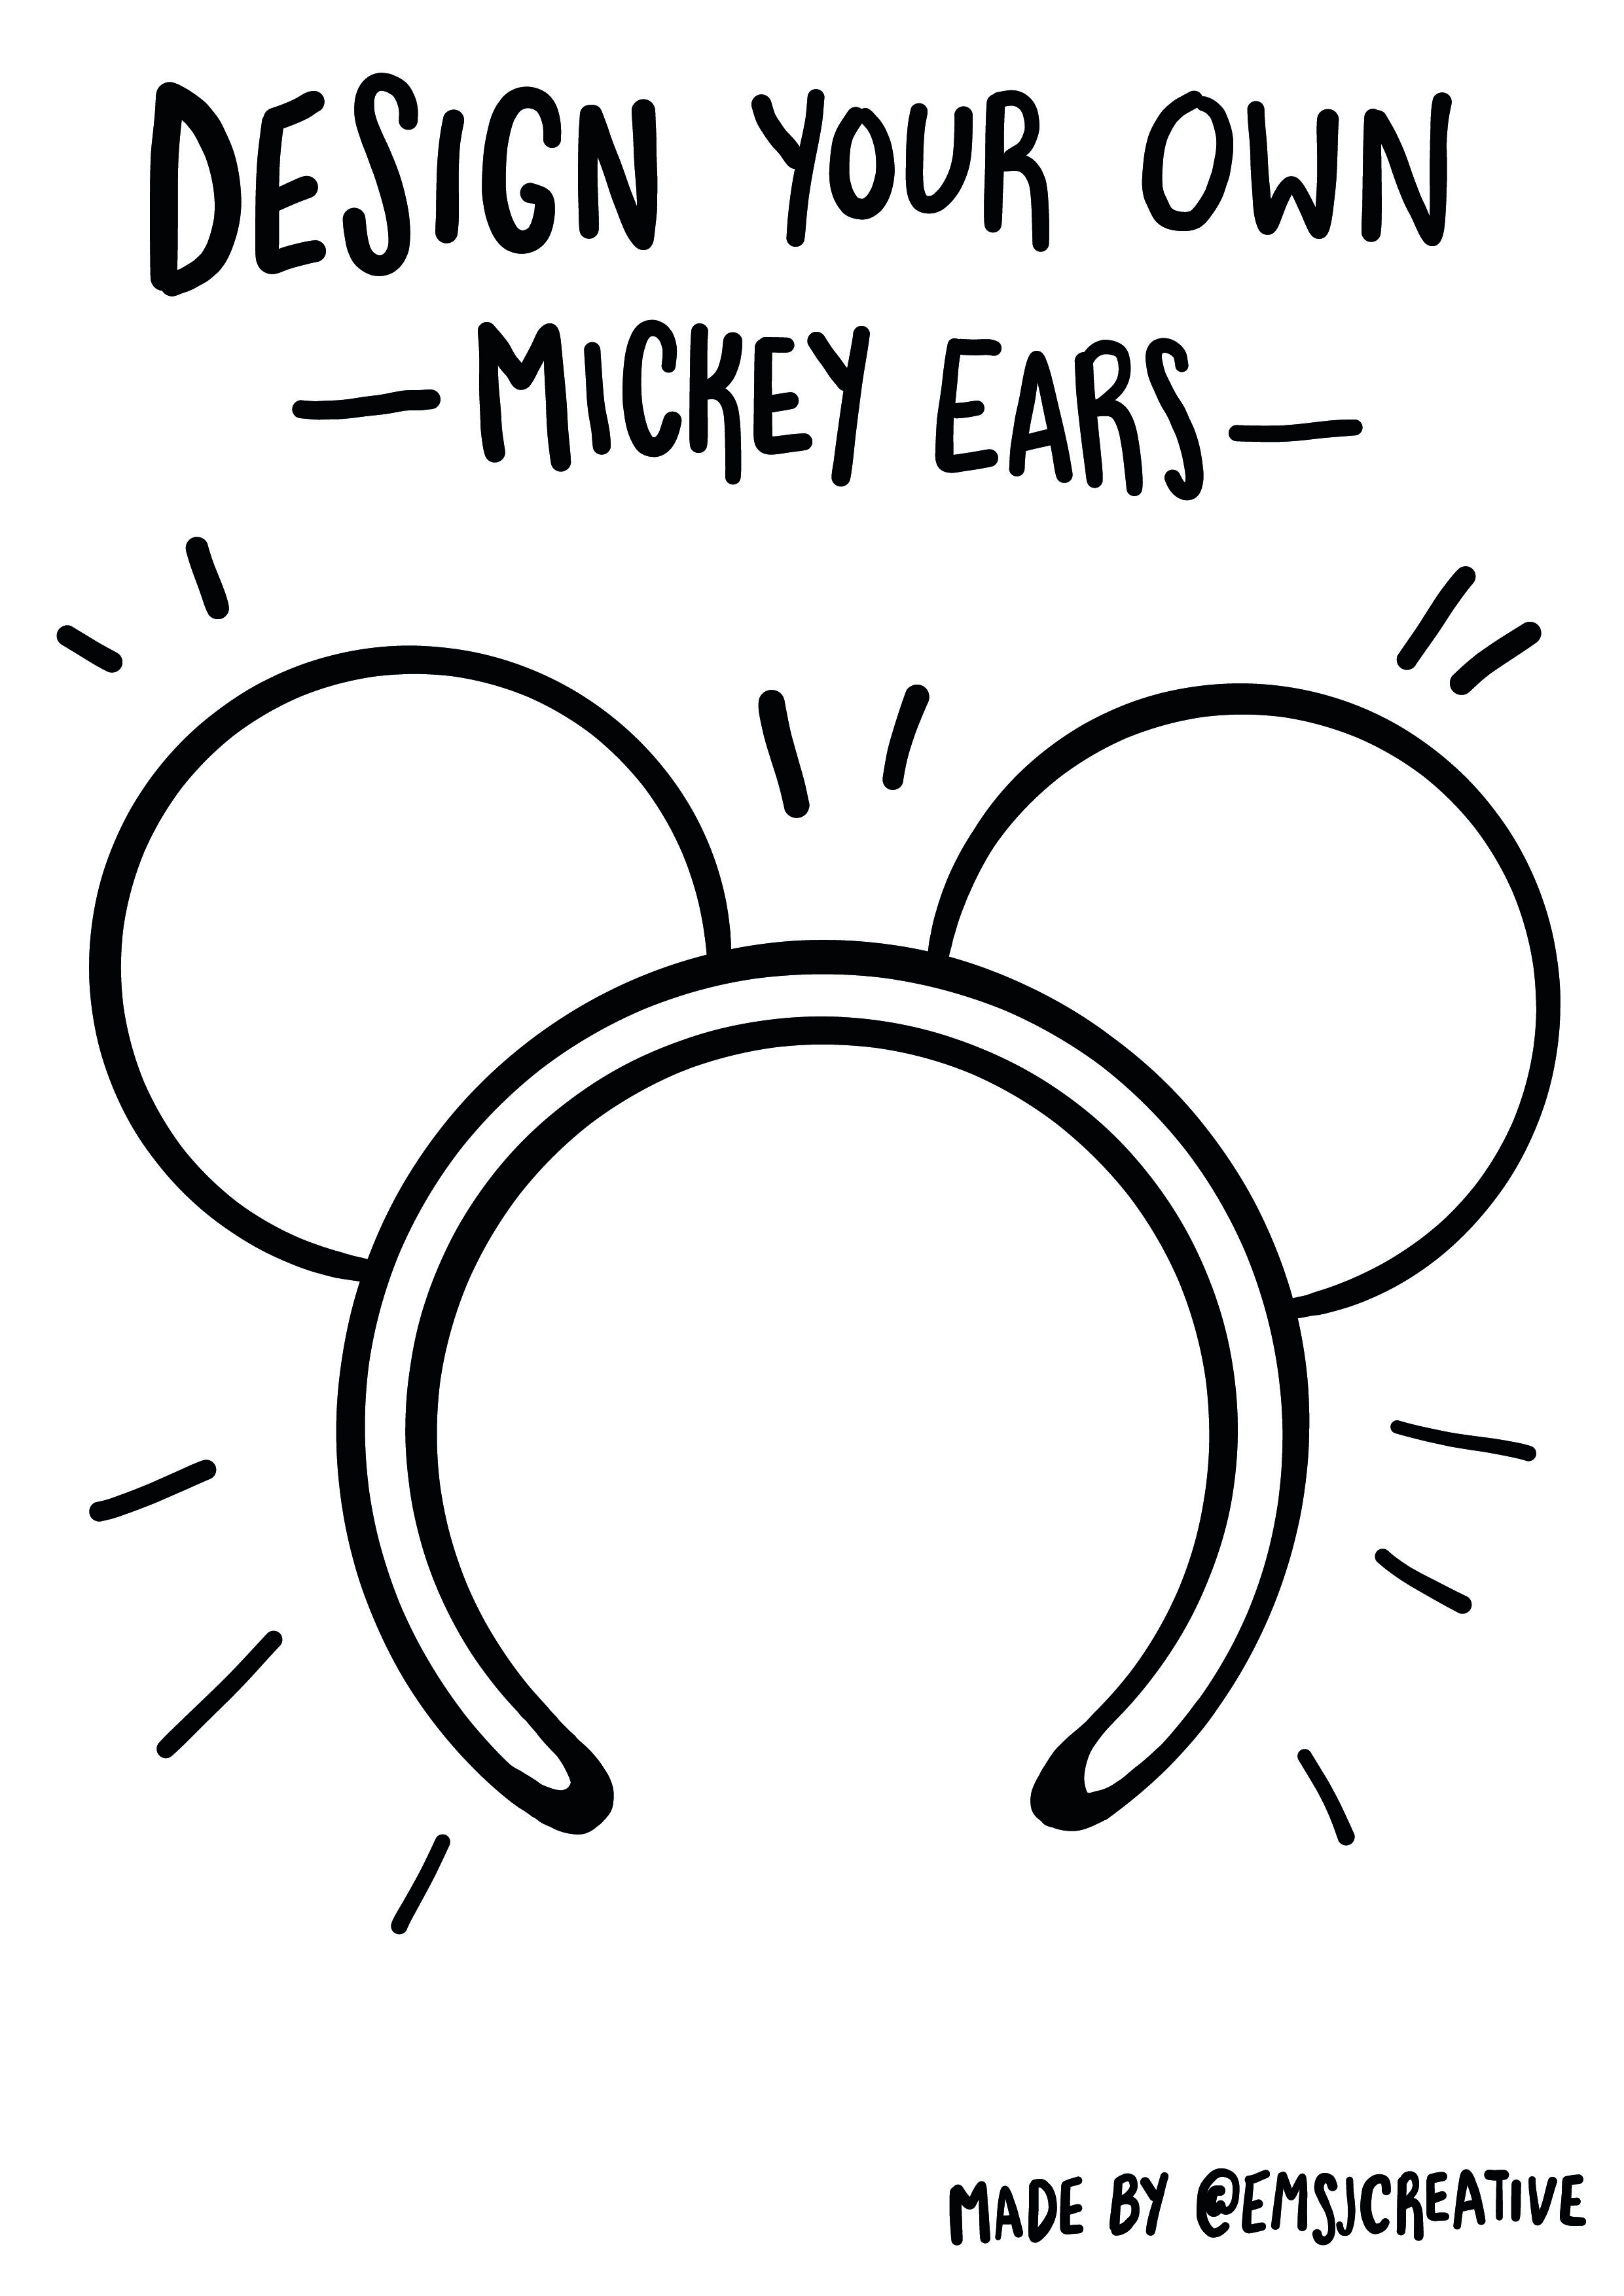 Design your own Mickey Ears